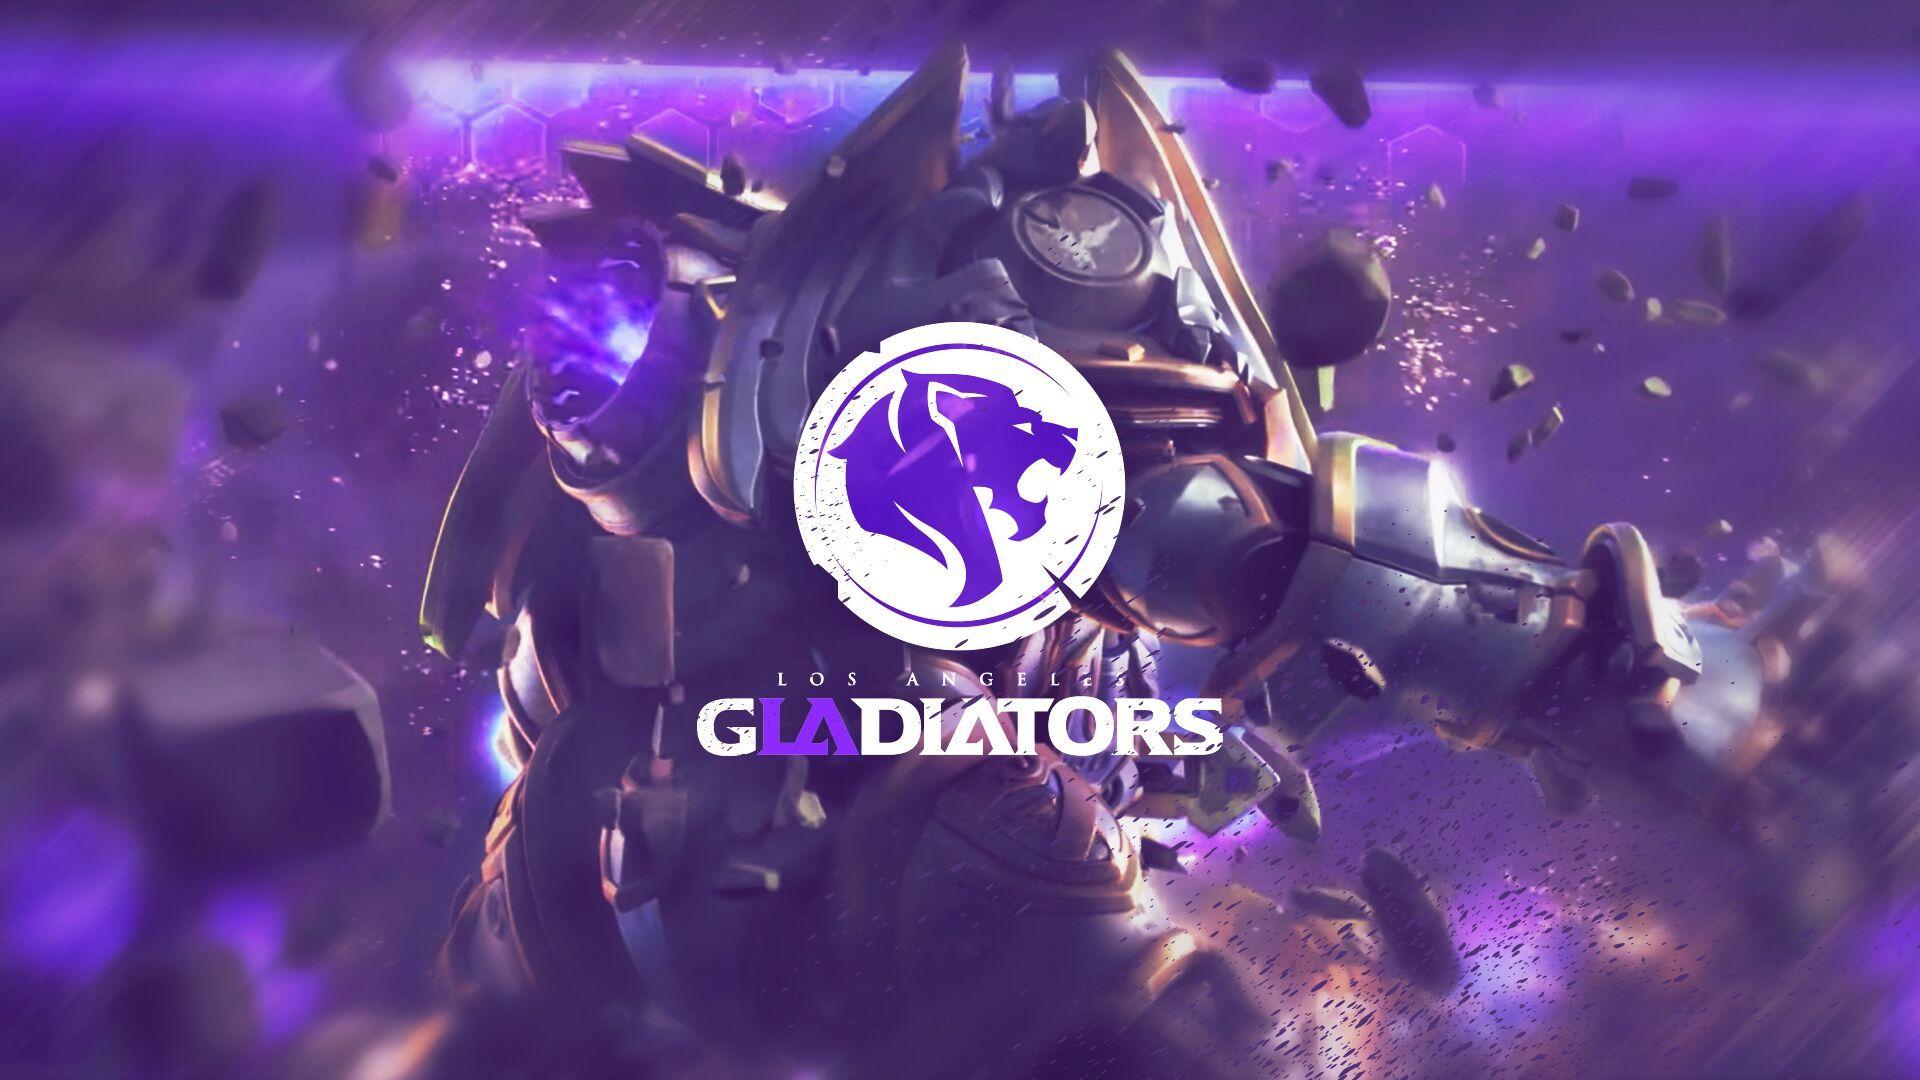 Los Angeles Gladiators're just getting started